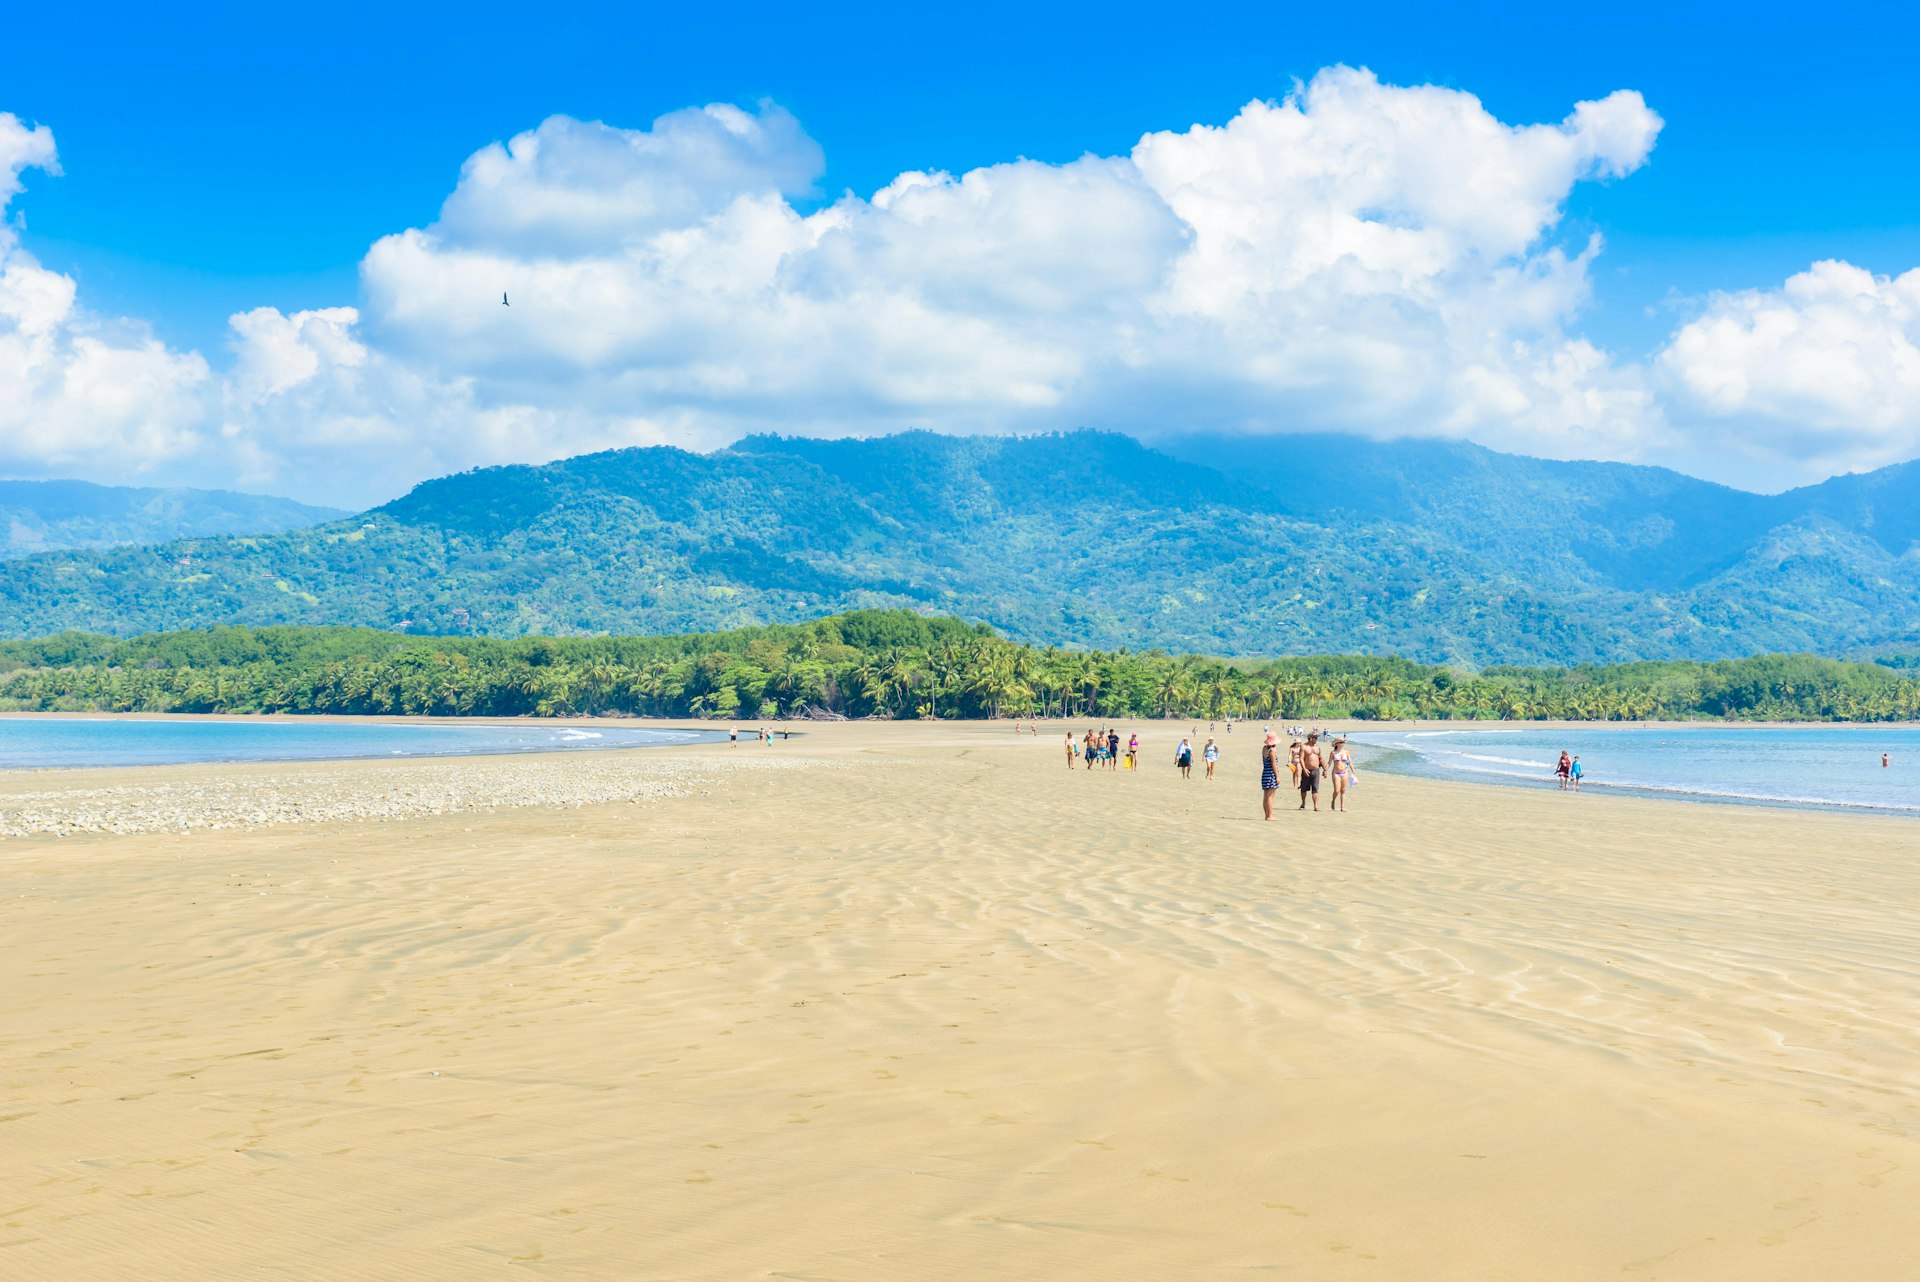 People walk over the expansive stretch of sand at Punta Uvita